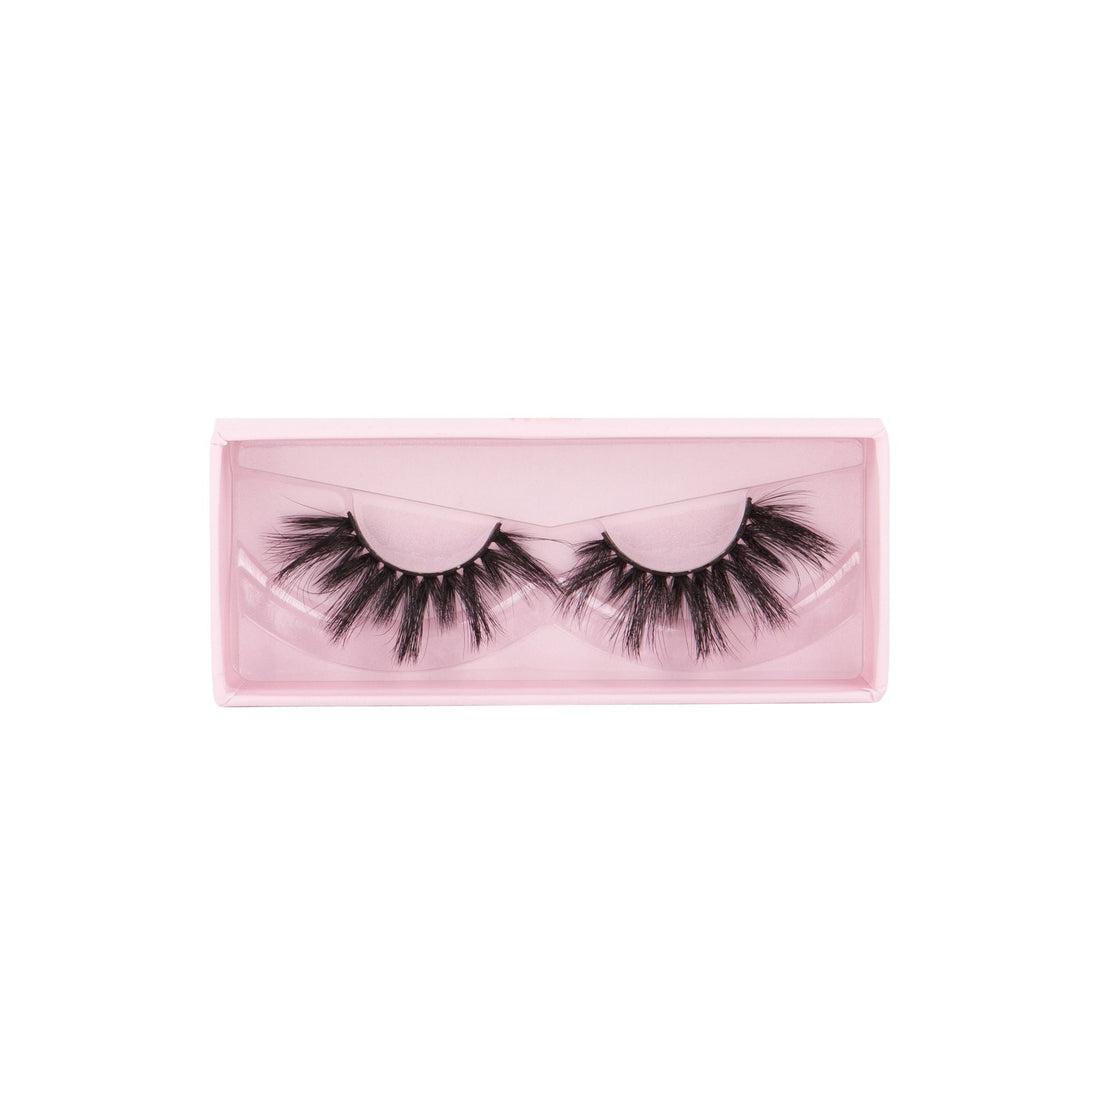 Glamour Us_Beauty Creations_Lashes_Adulting 3D Silk False Lashes__ADULTING